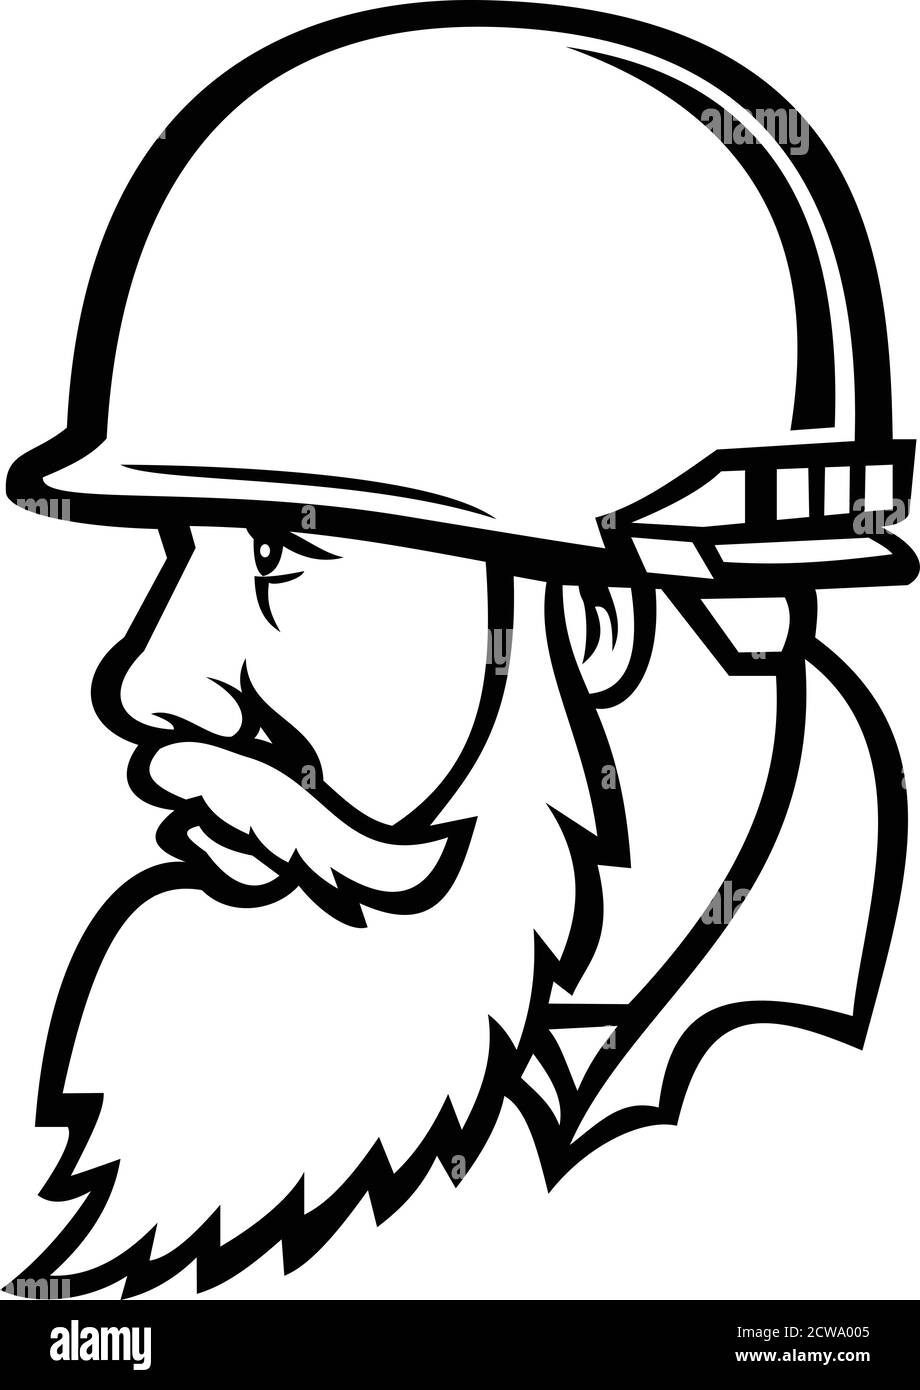 Mascot illustration of head of a Vietnam war American soldier wearing combat helmet with full beard looking to side viewed from   side on isolated bac Stock Vector